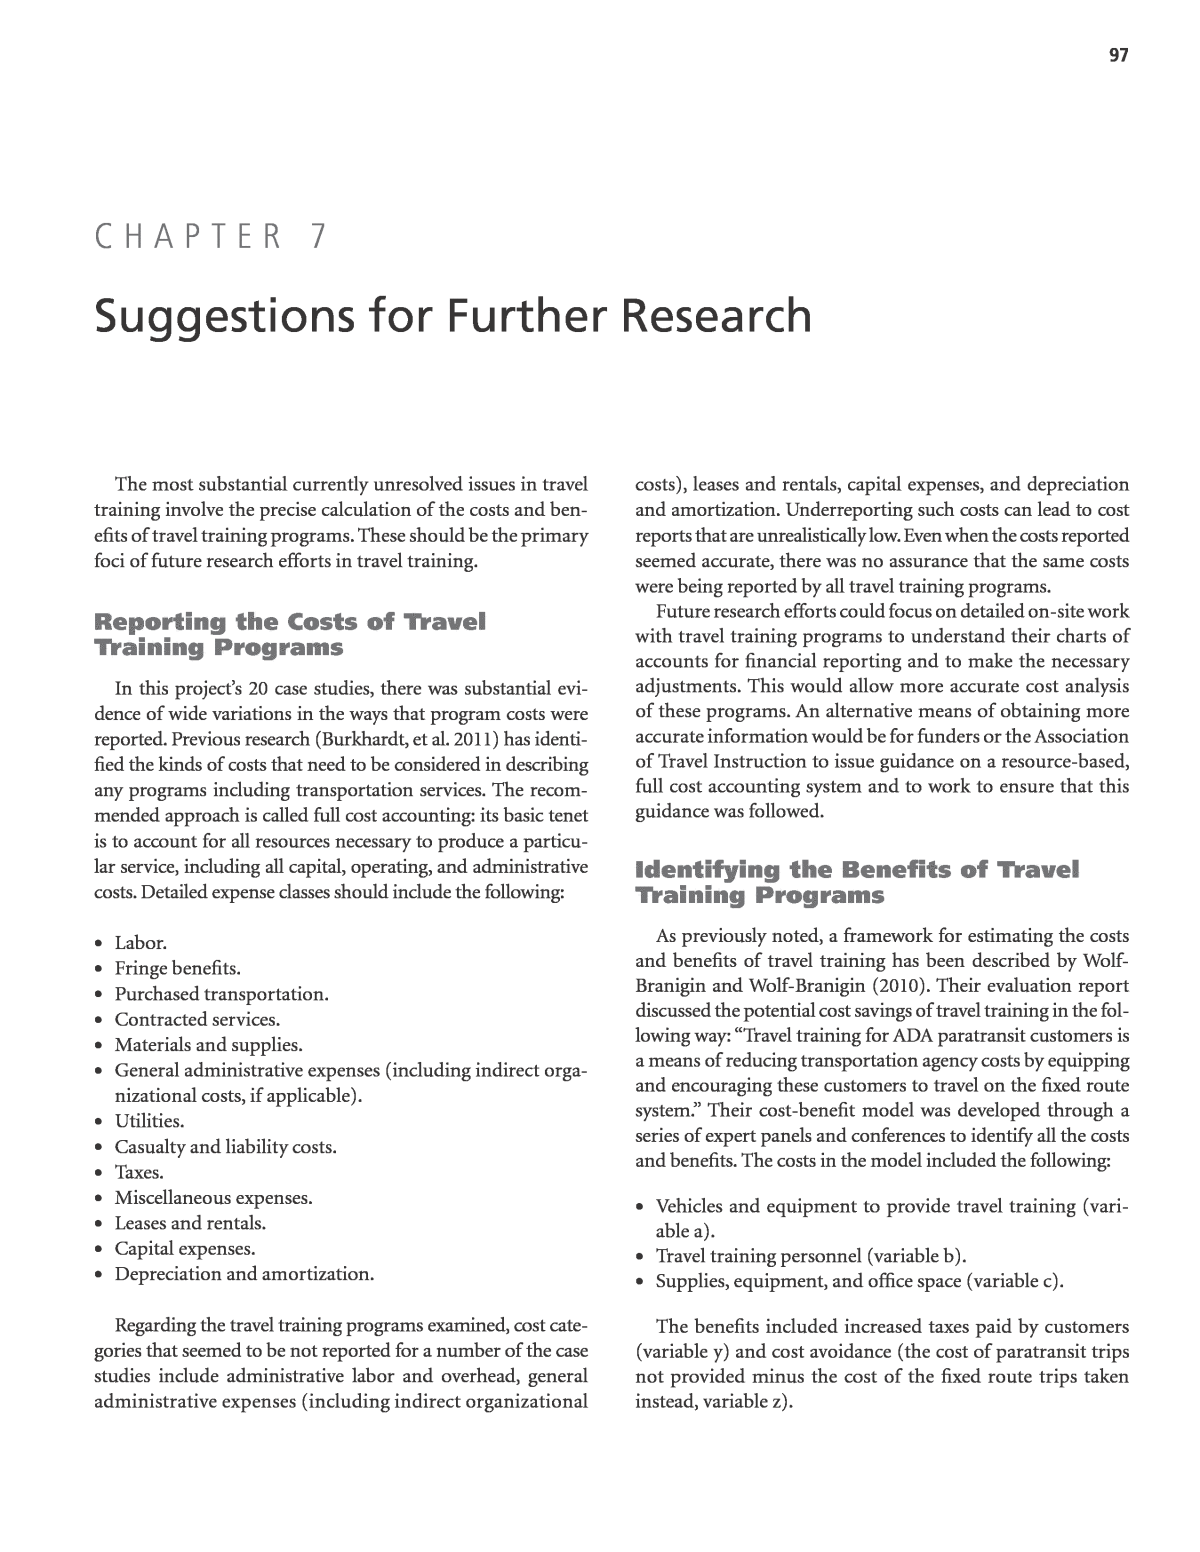 how to write suggestions for further research